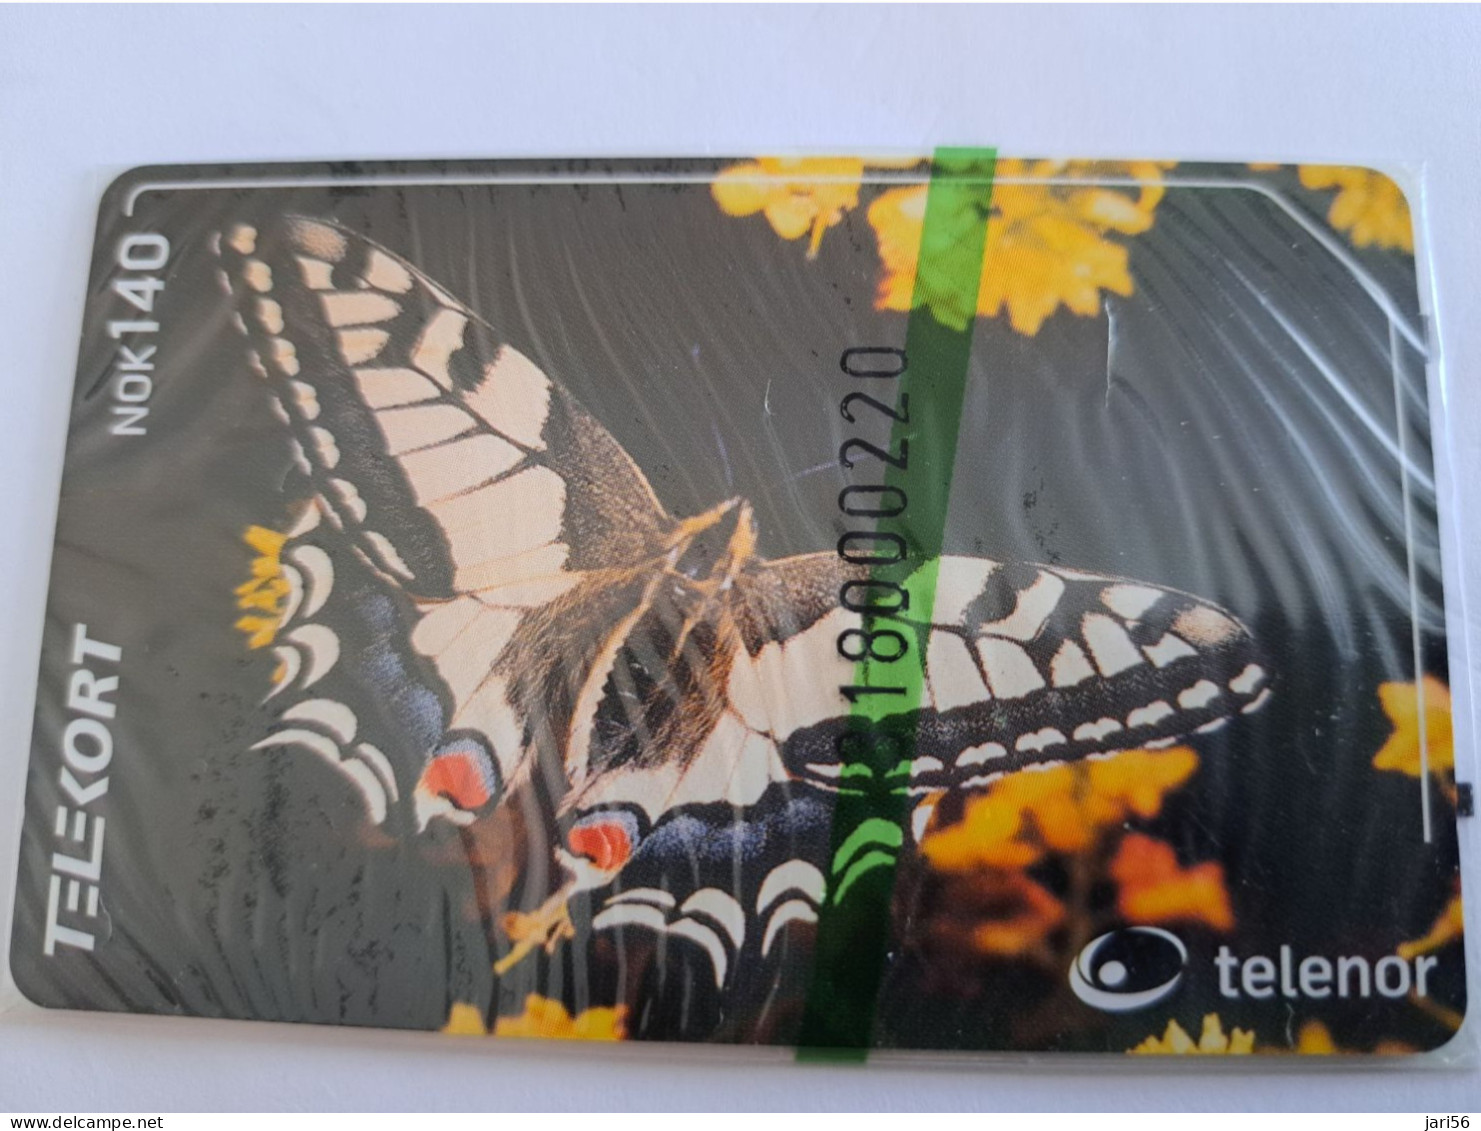 NORWAY / CHIPCARD/  TELENOR / 140 NOK  /  BUTTERFLY/ PAPPILLION/  / TIRAGE 7000 /    N-211  MINT IN WRAPPER **14521** - Norvegia